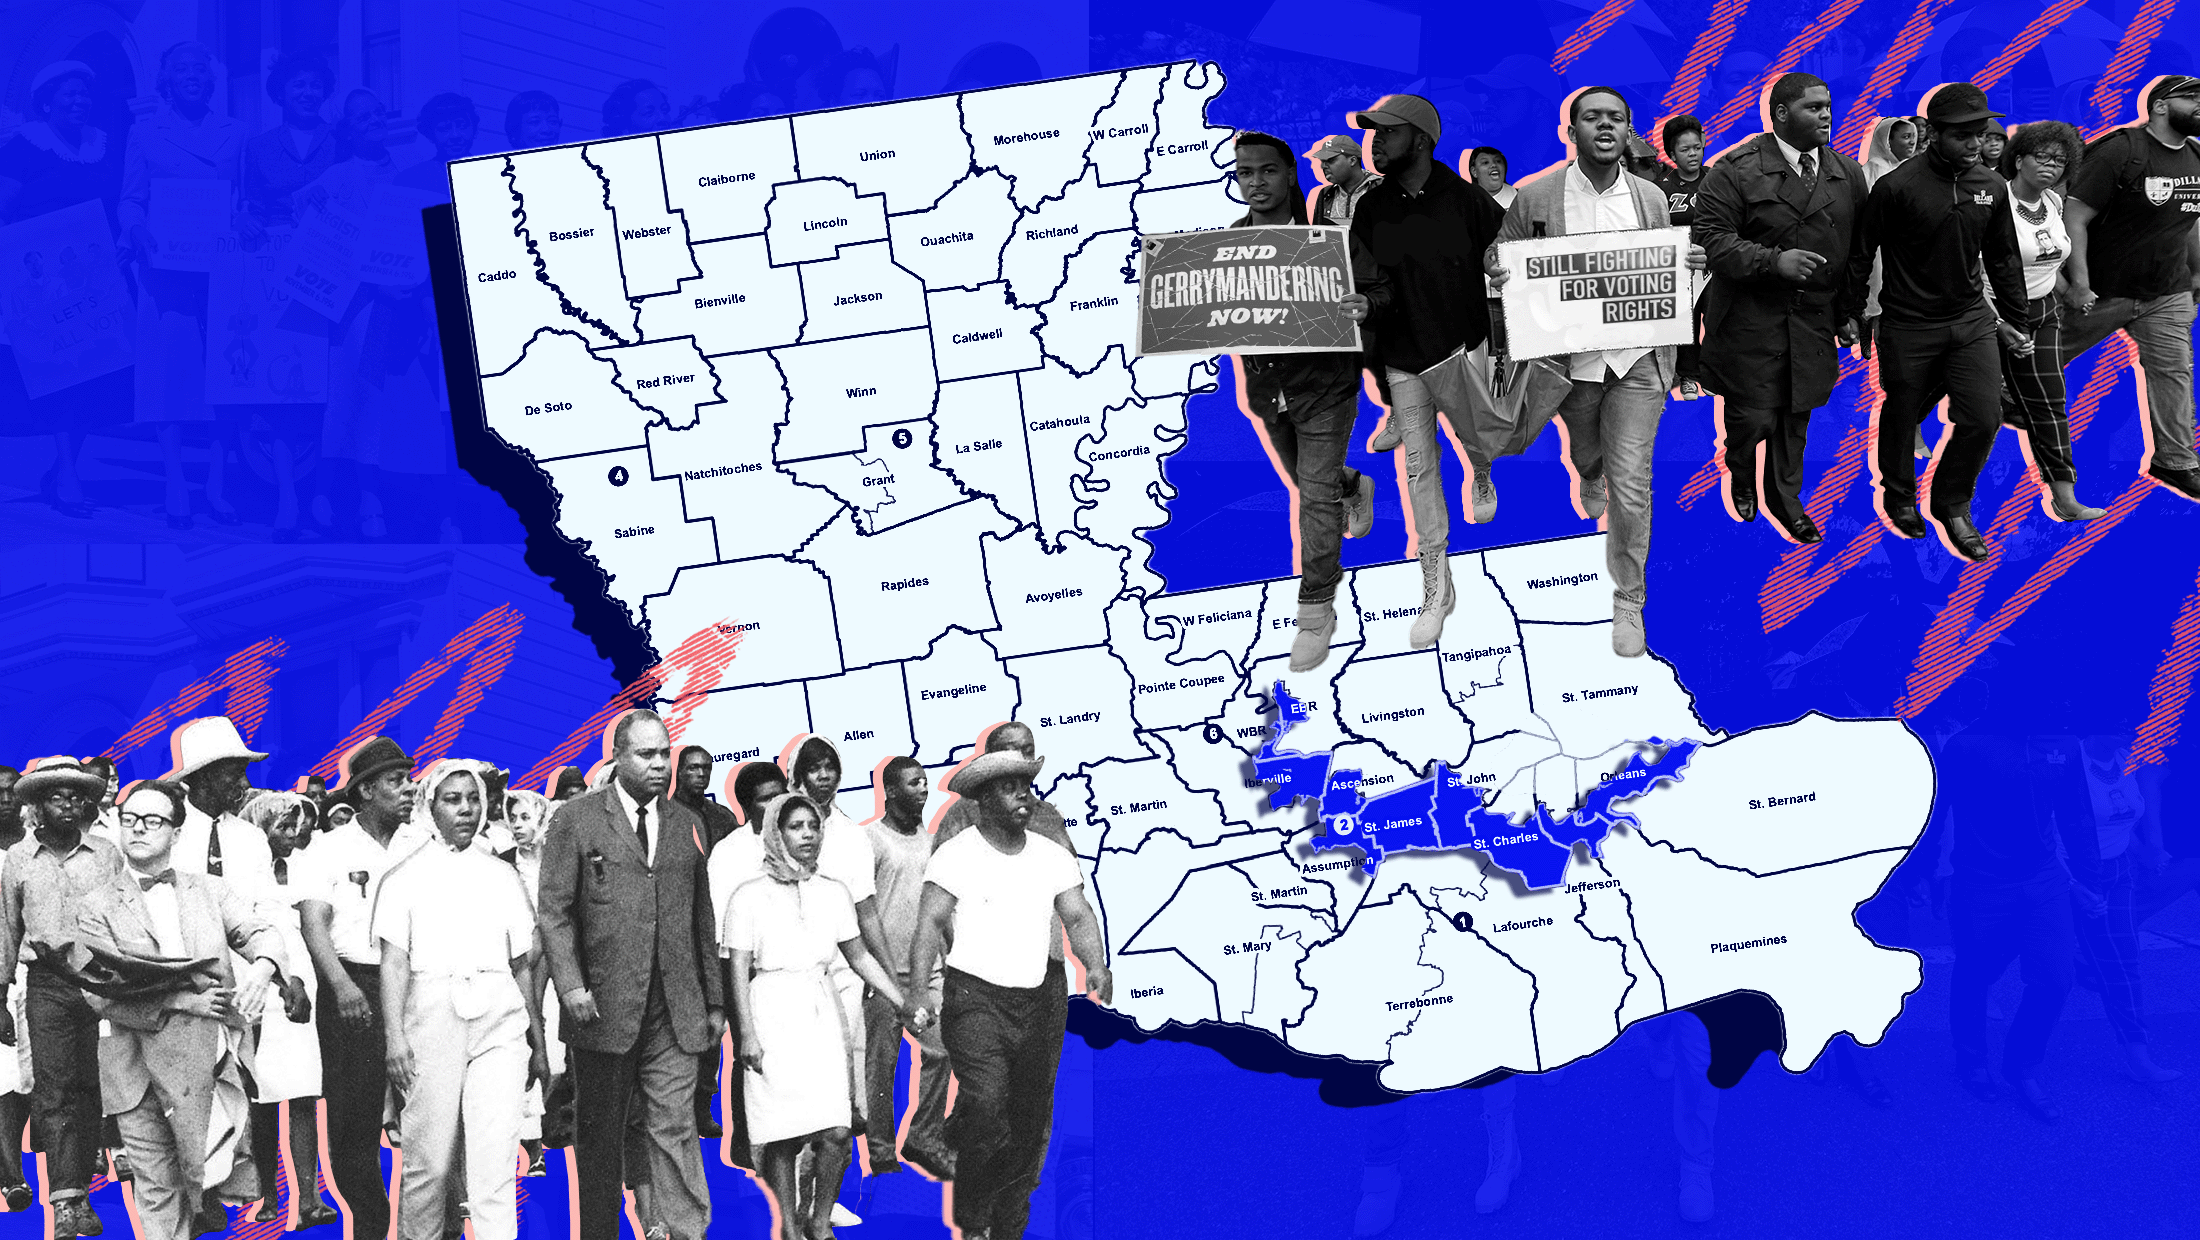 A blue background with a map of Louisiana in the middle. On the left side of the map, there are Black activists from the civil rights movment marching. On the right side of the map, there are modern day Black activists marching for voting rights.